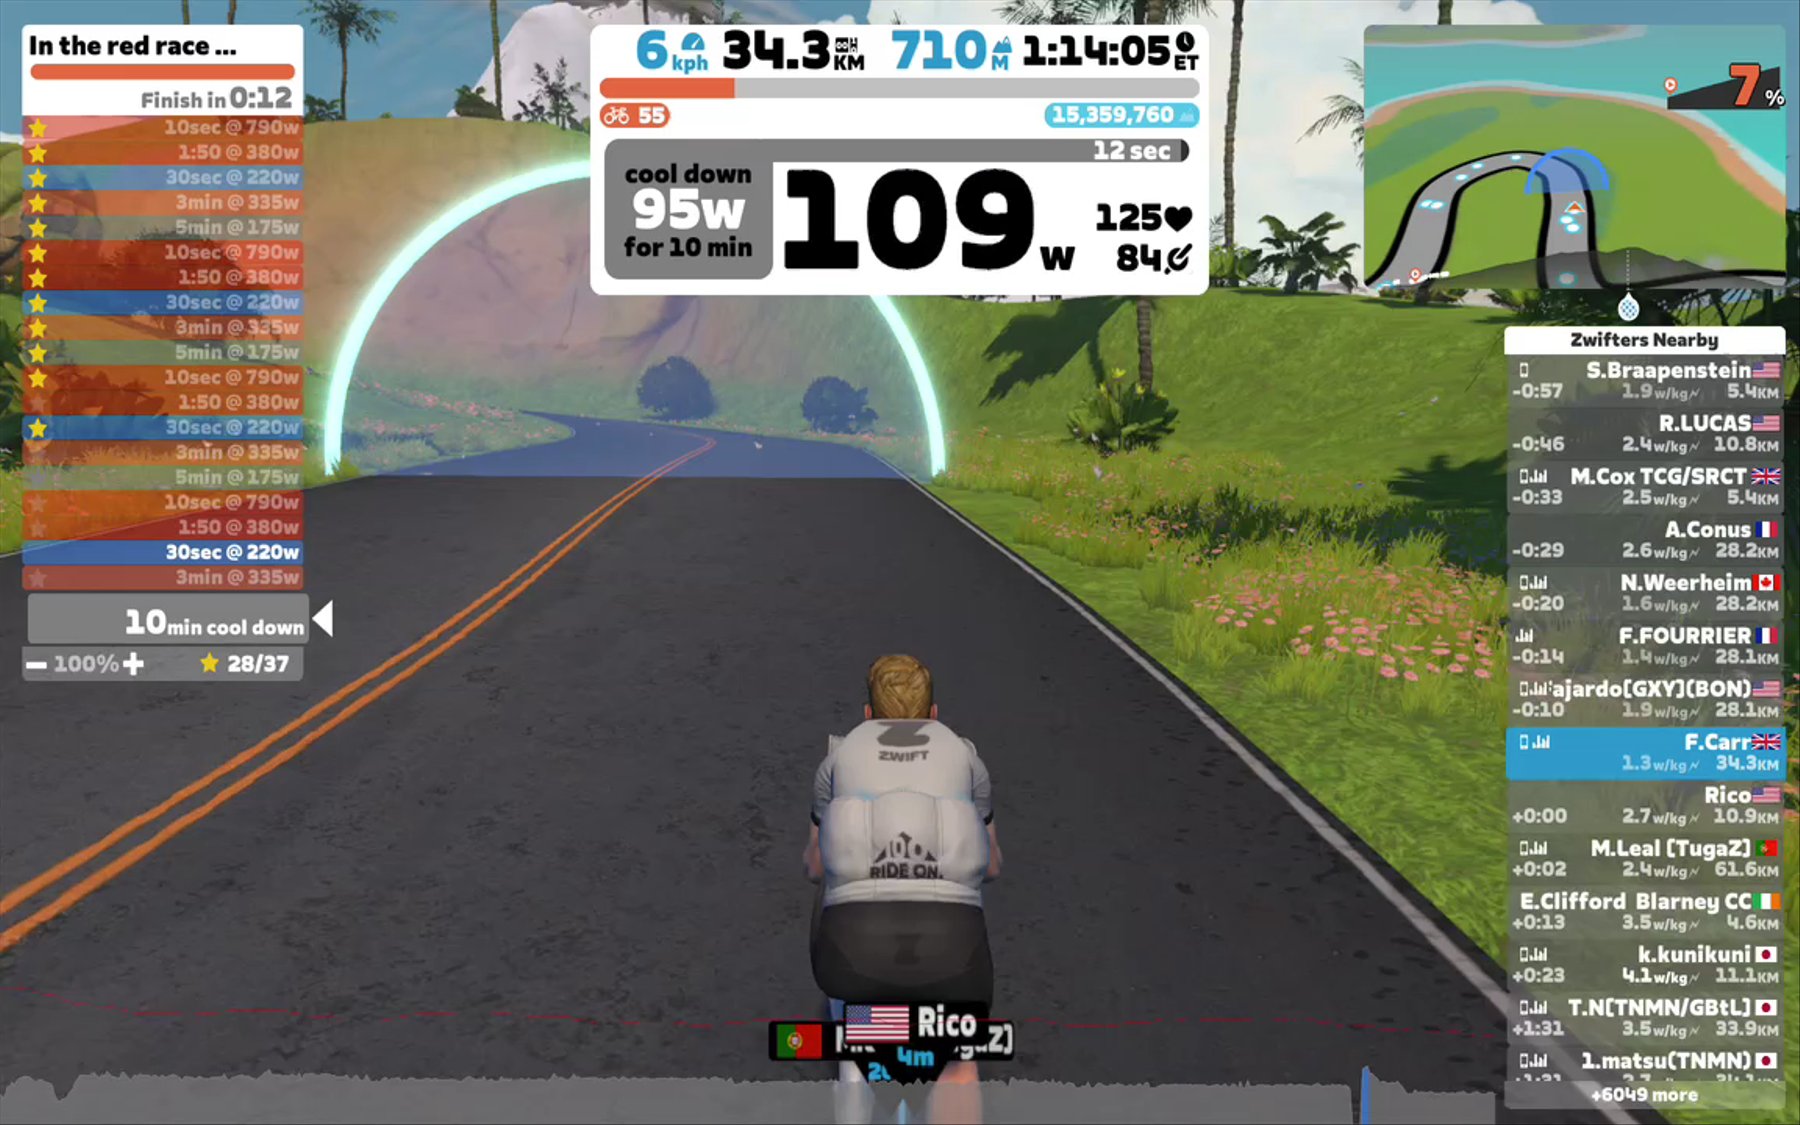 Zwift - In the red race Intervals in Watopia